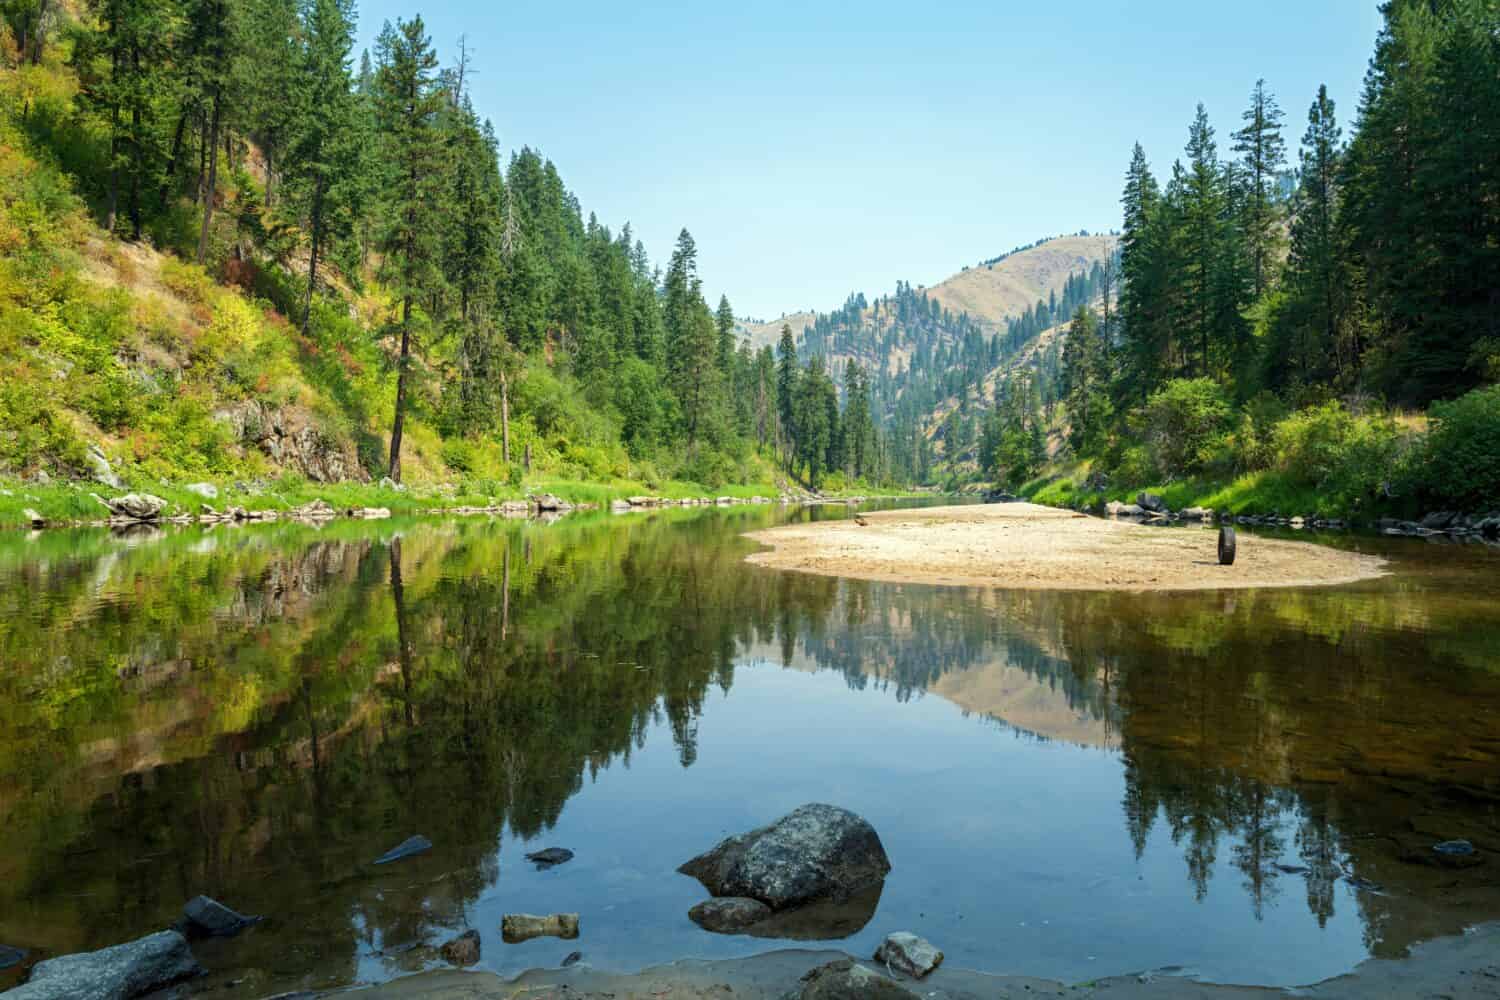 The forest is reflected in the South Fork of the Clearwater River in Idaho, USA